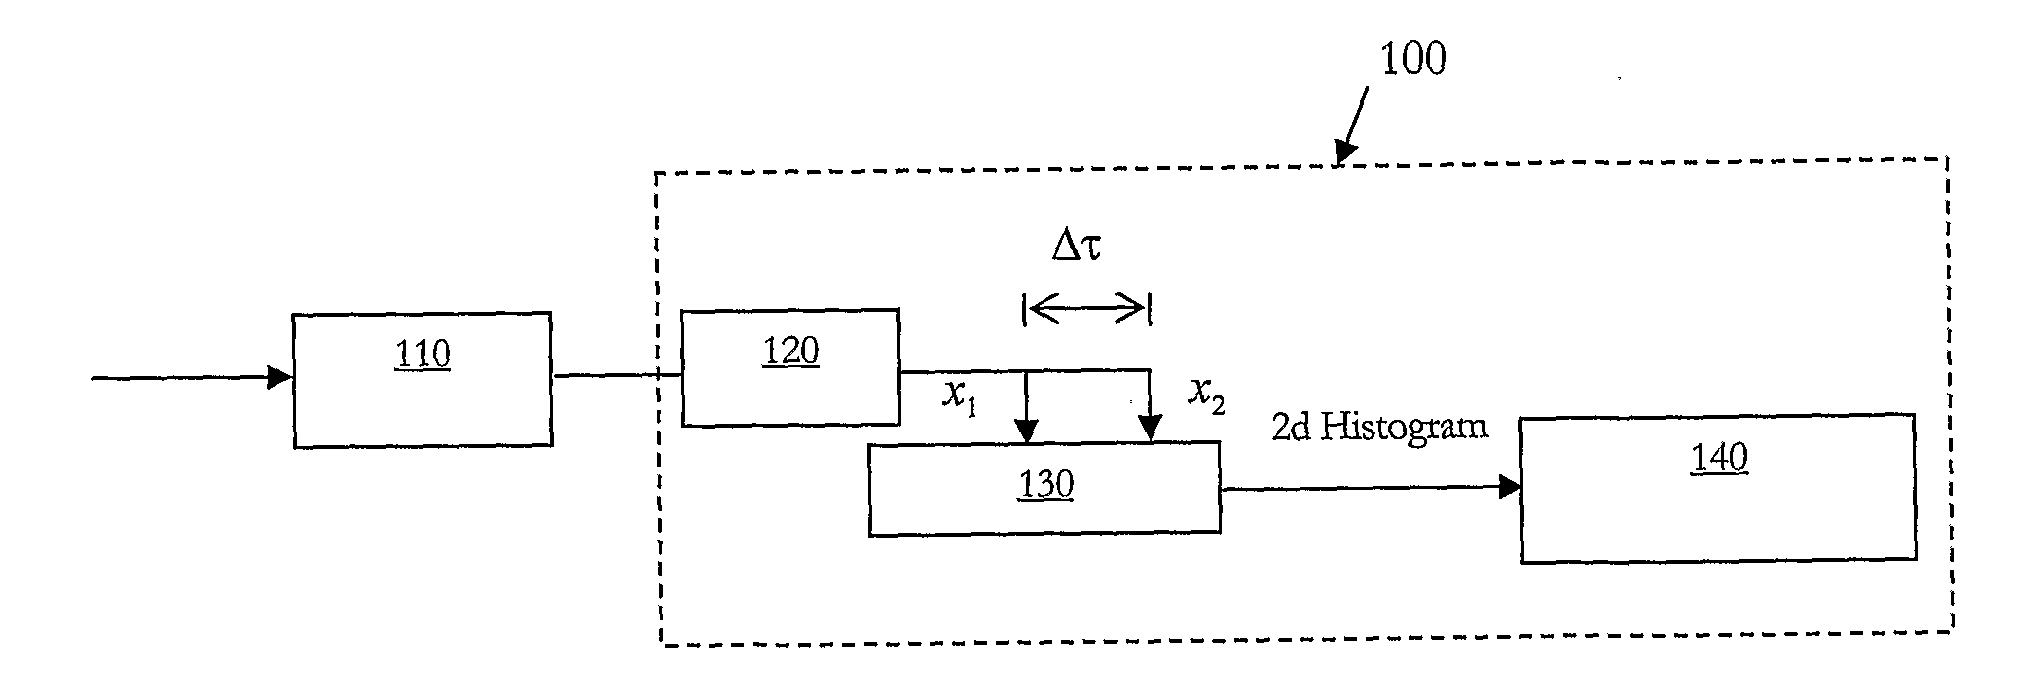 Method and apparatus for sampled optical signal monitoring